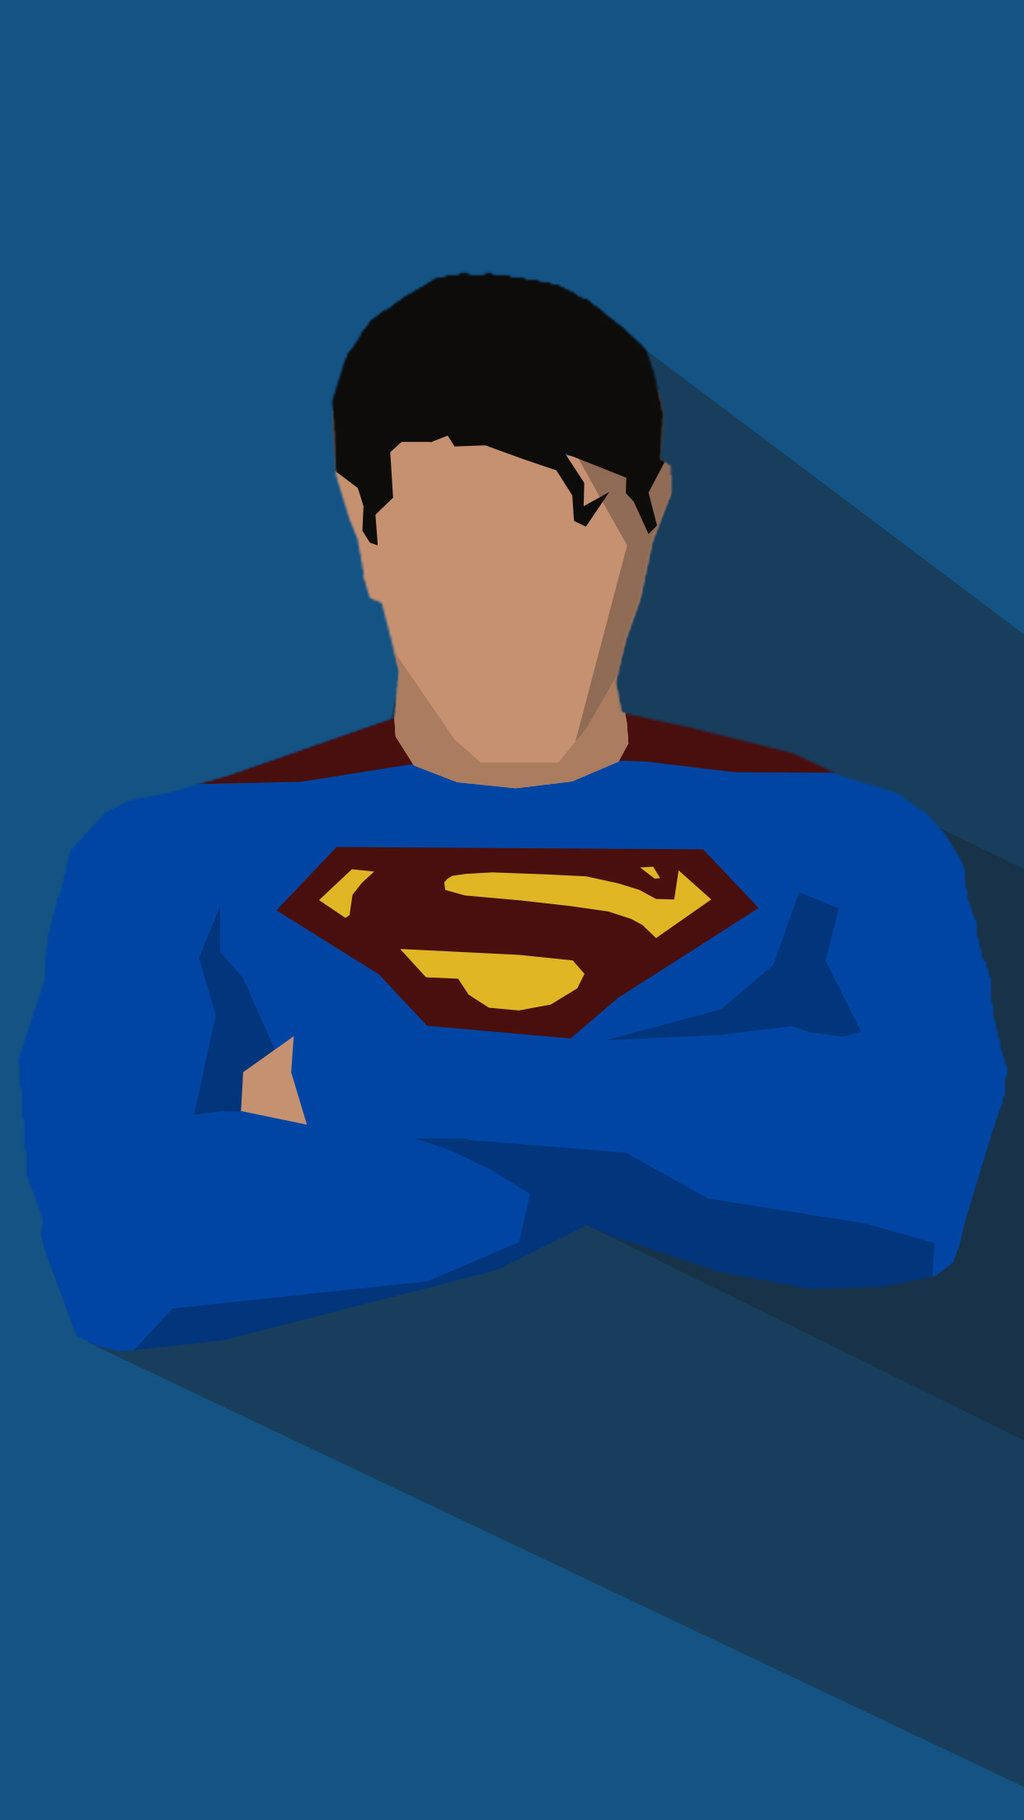 Superman With Iconic Red And Blue Costume Wallpaper